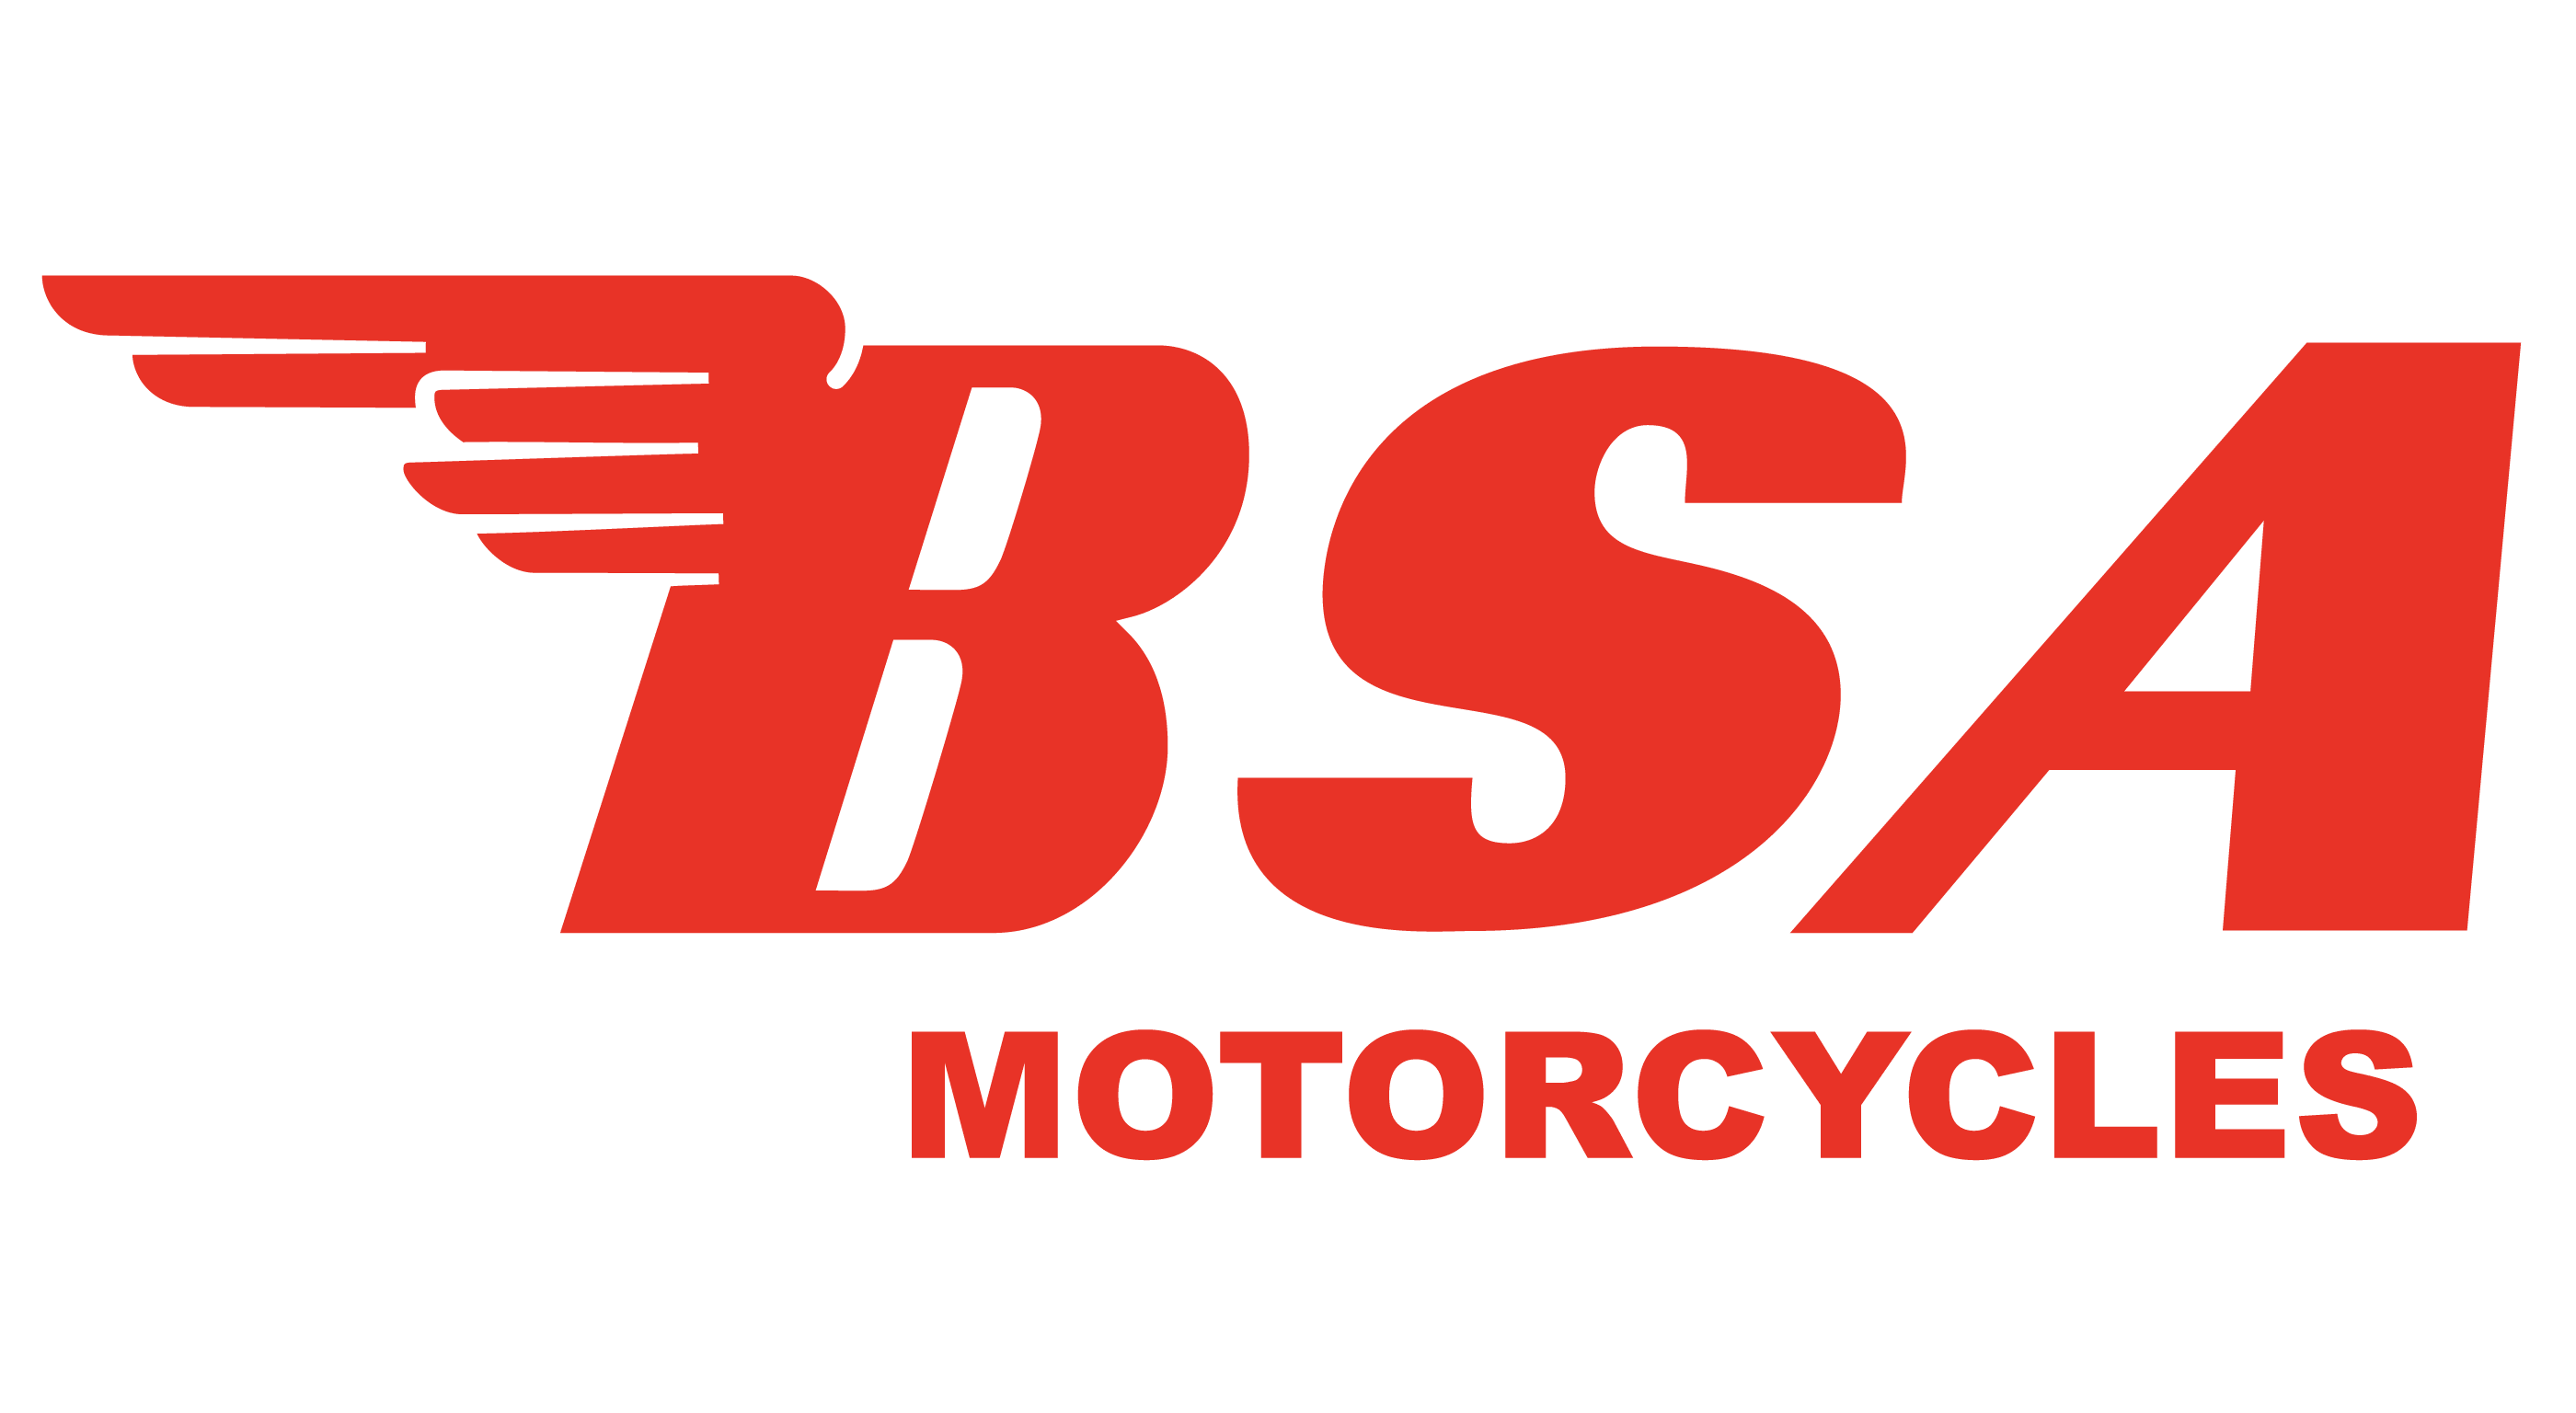 B.S.a Logo - BSA motorcycle logo history and Meaning, bike emblem